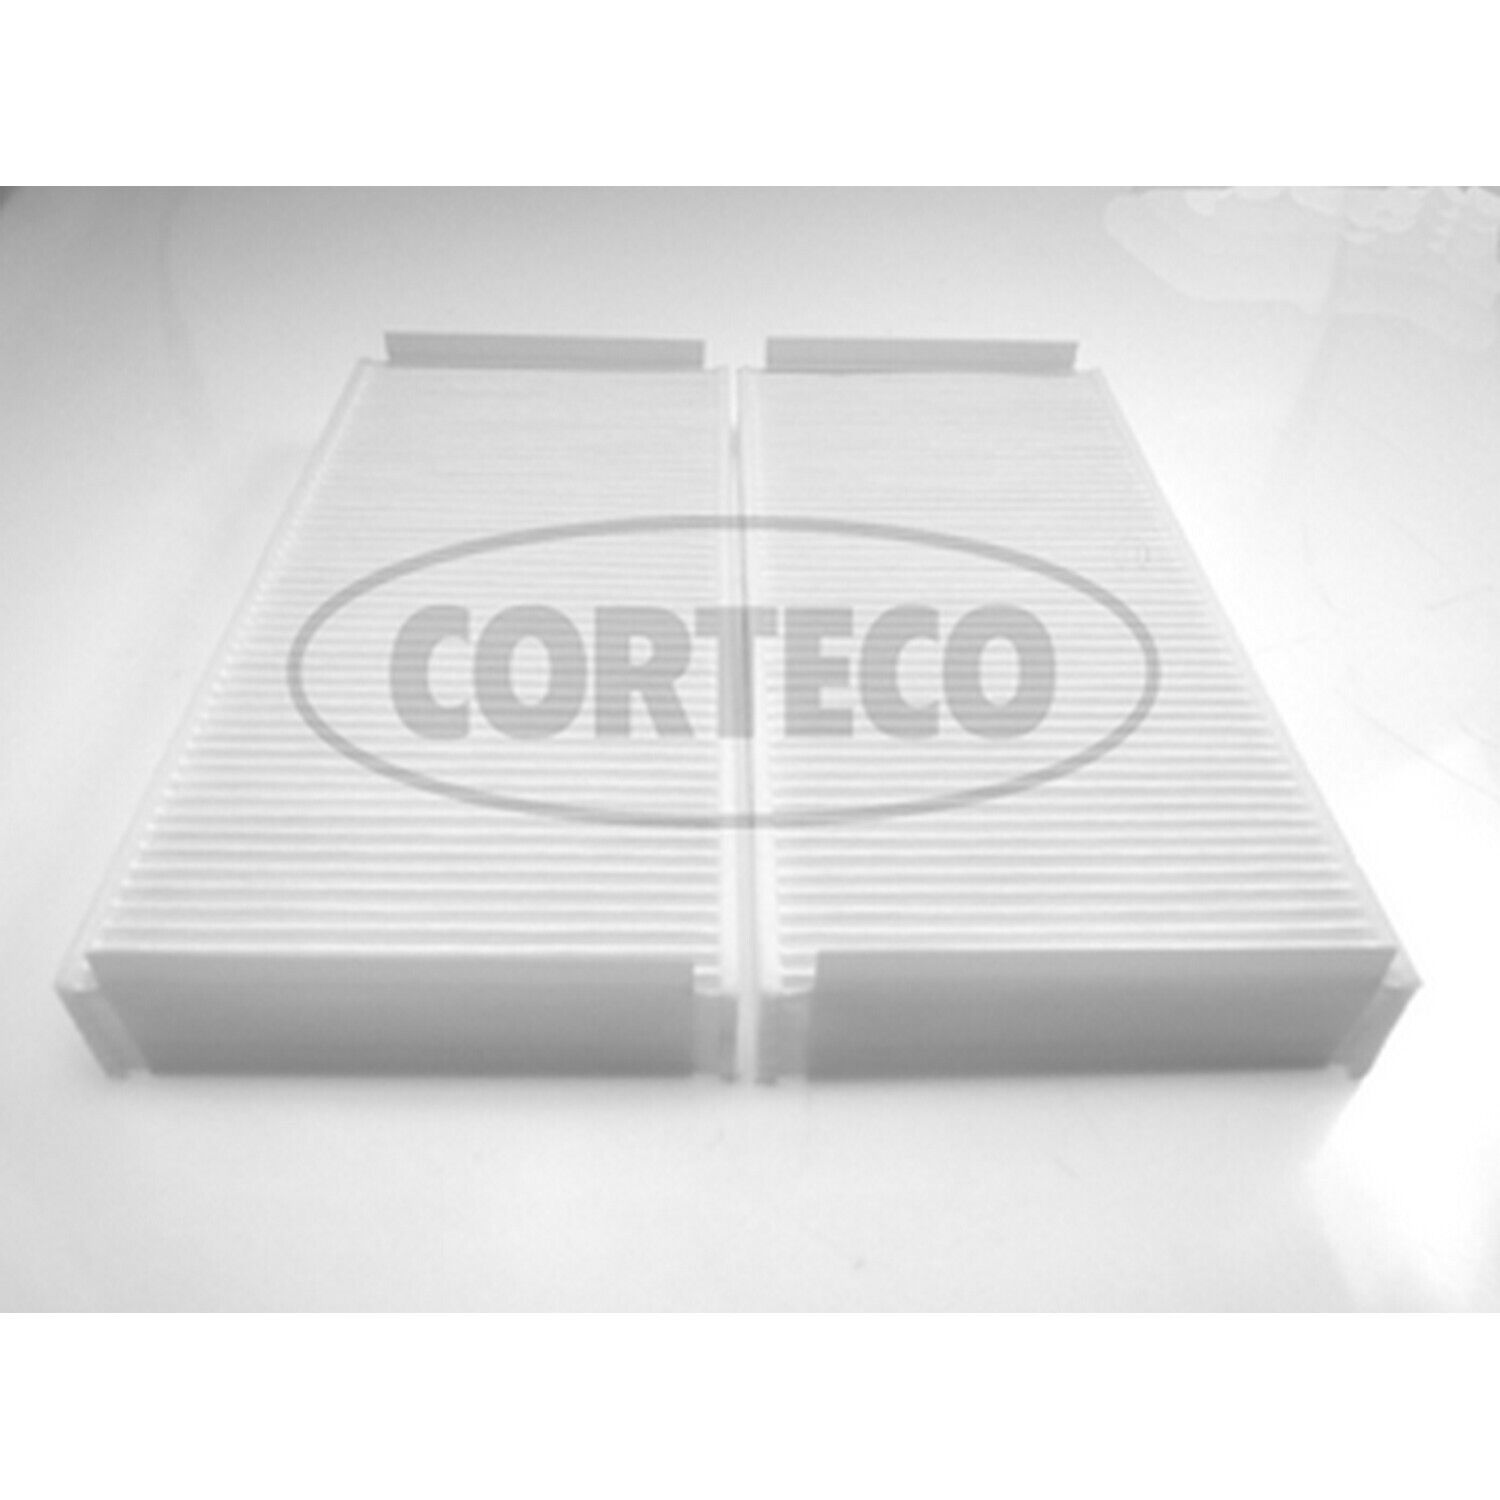 Cabin Air Filter for 57, 62, CL500, CL55 AMG, CL600, CL65 AMG+More 21651195